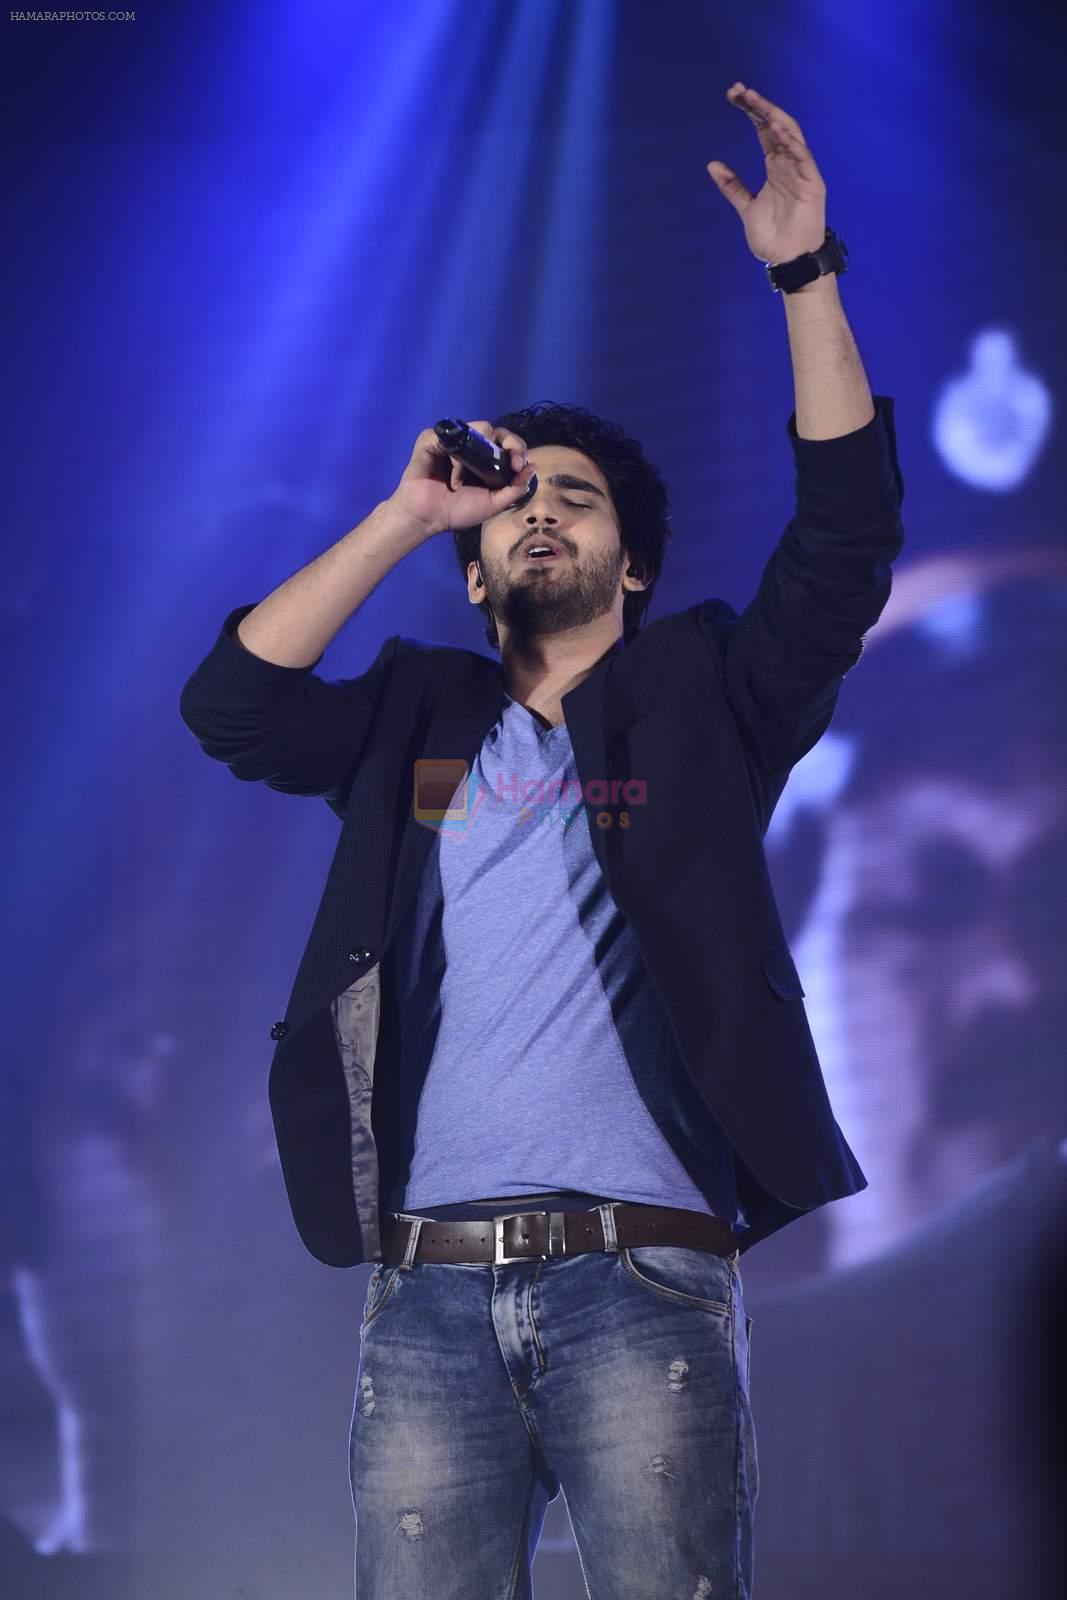 Amaal Mallik at Hero music launch in Taj Lands End on 6th Sept 2015